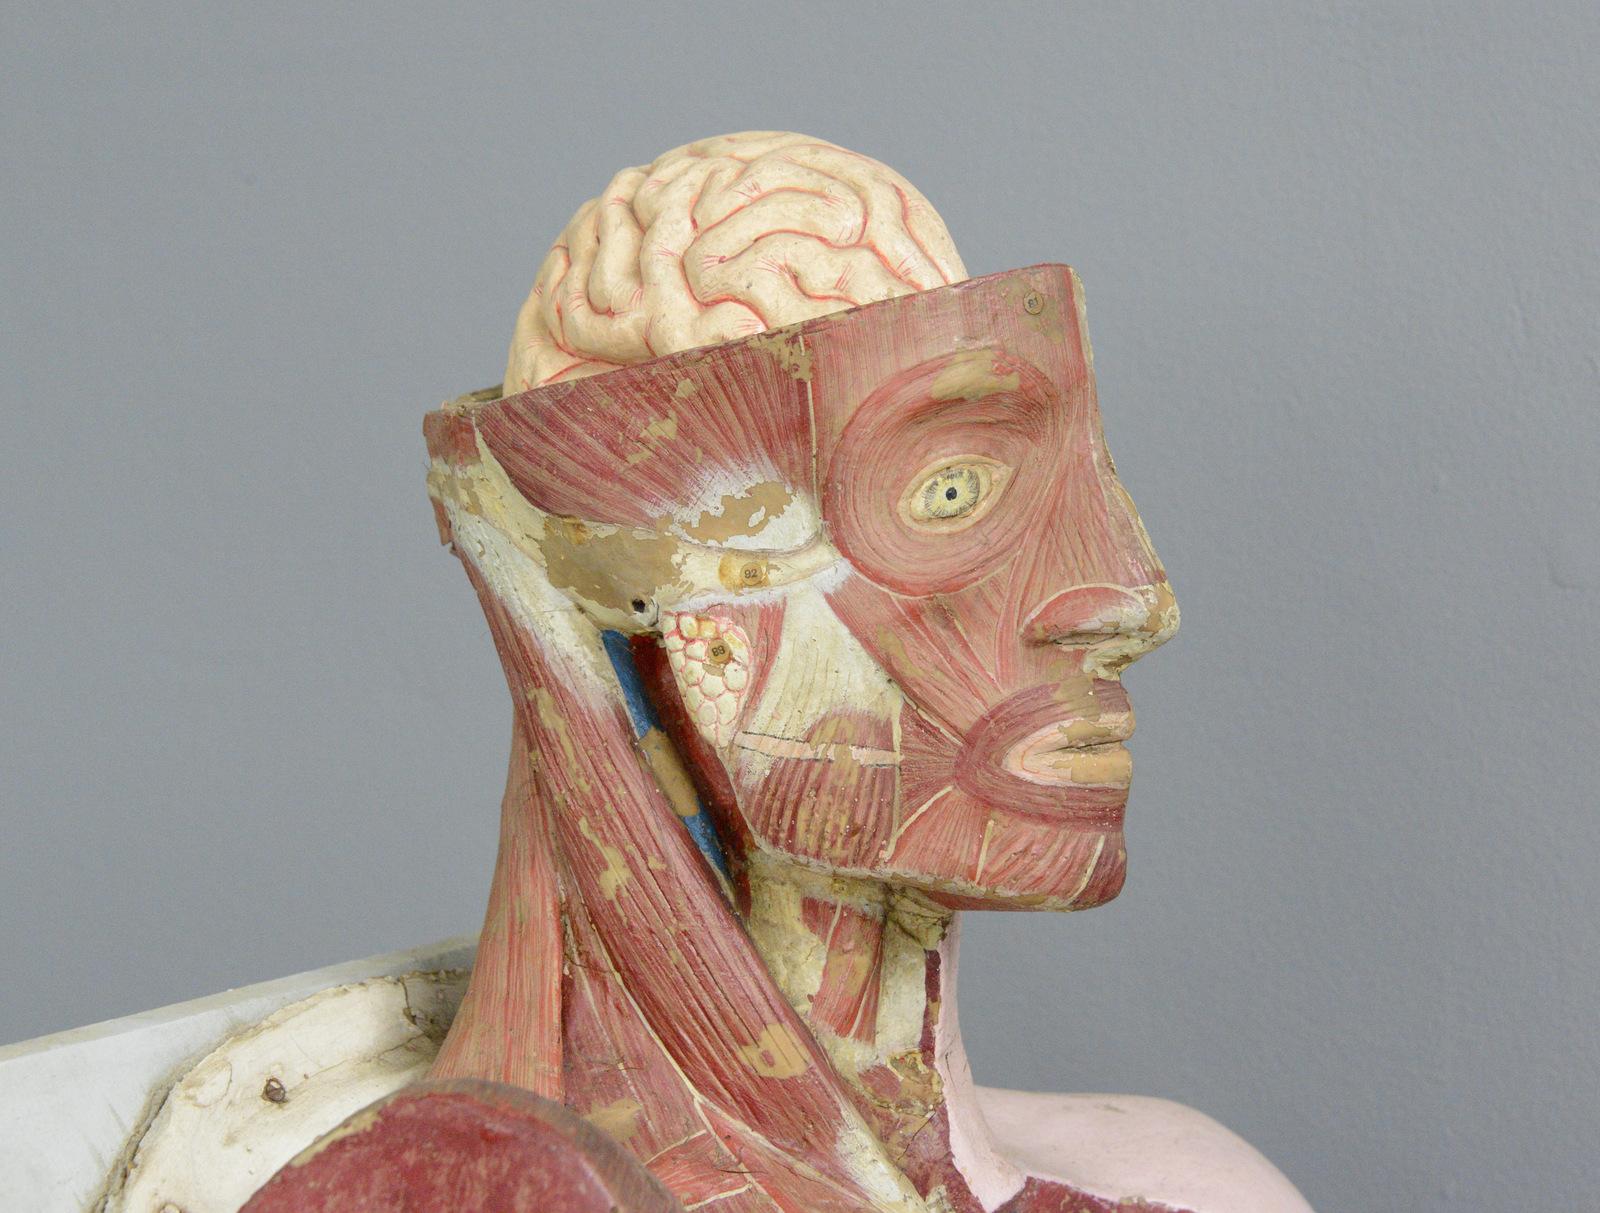 19th Century Anatomical Model by Dr Auzoux 4